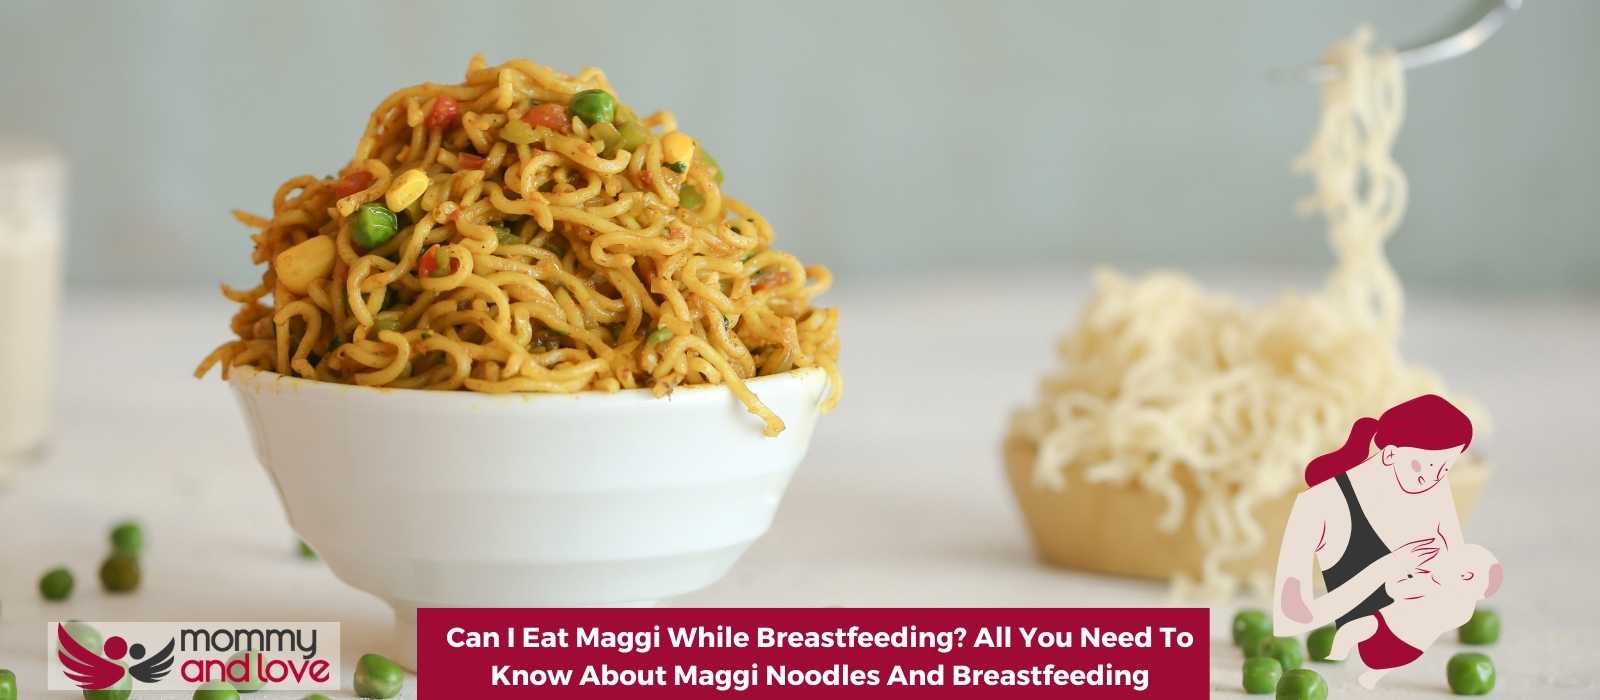 Can I Eat Maggi While Breastfeeding All You Need To Know About Maggi Noodles And Breastfeeding